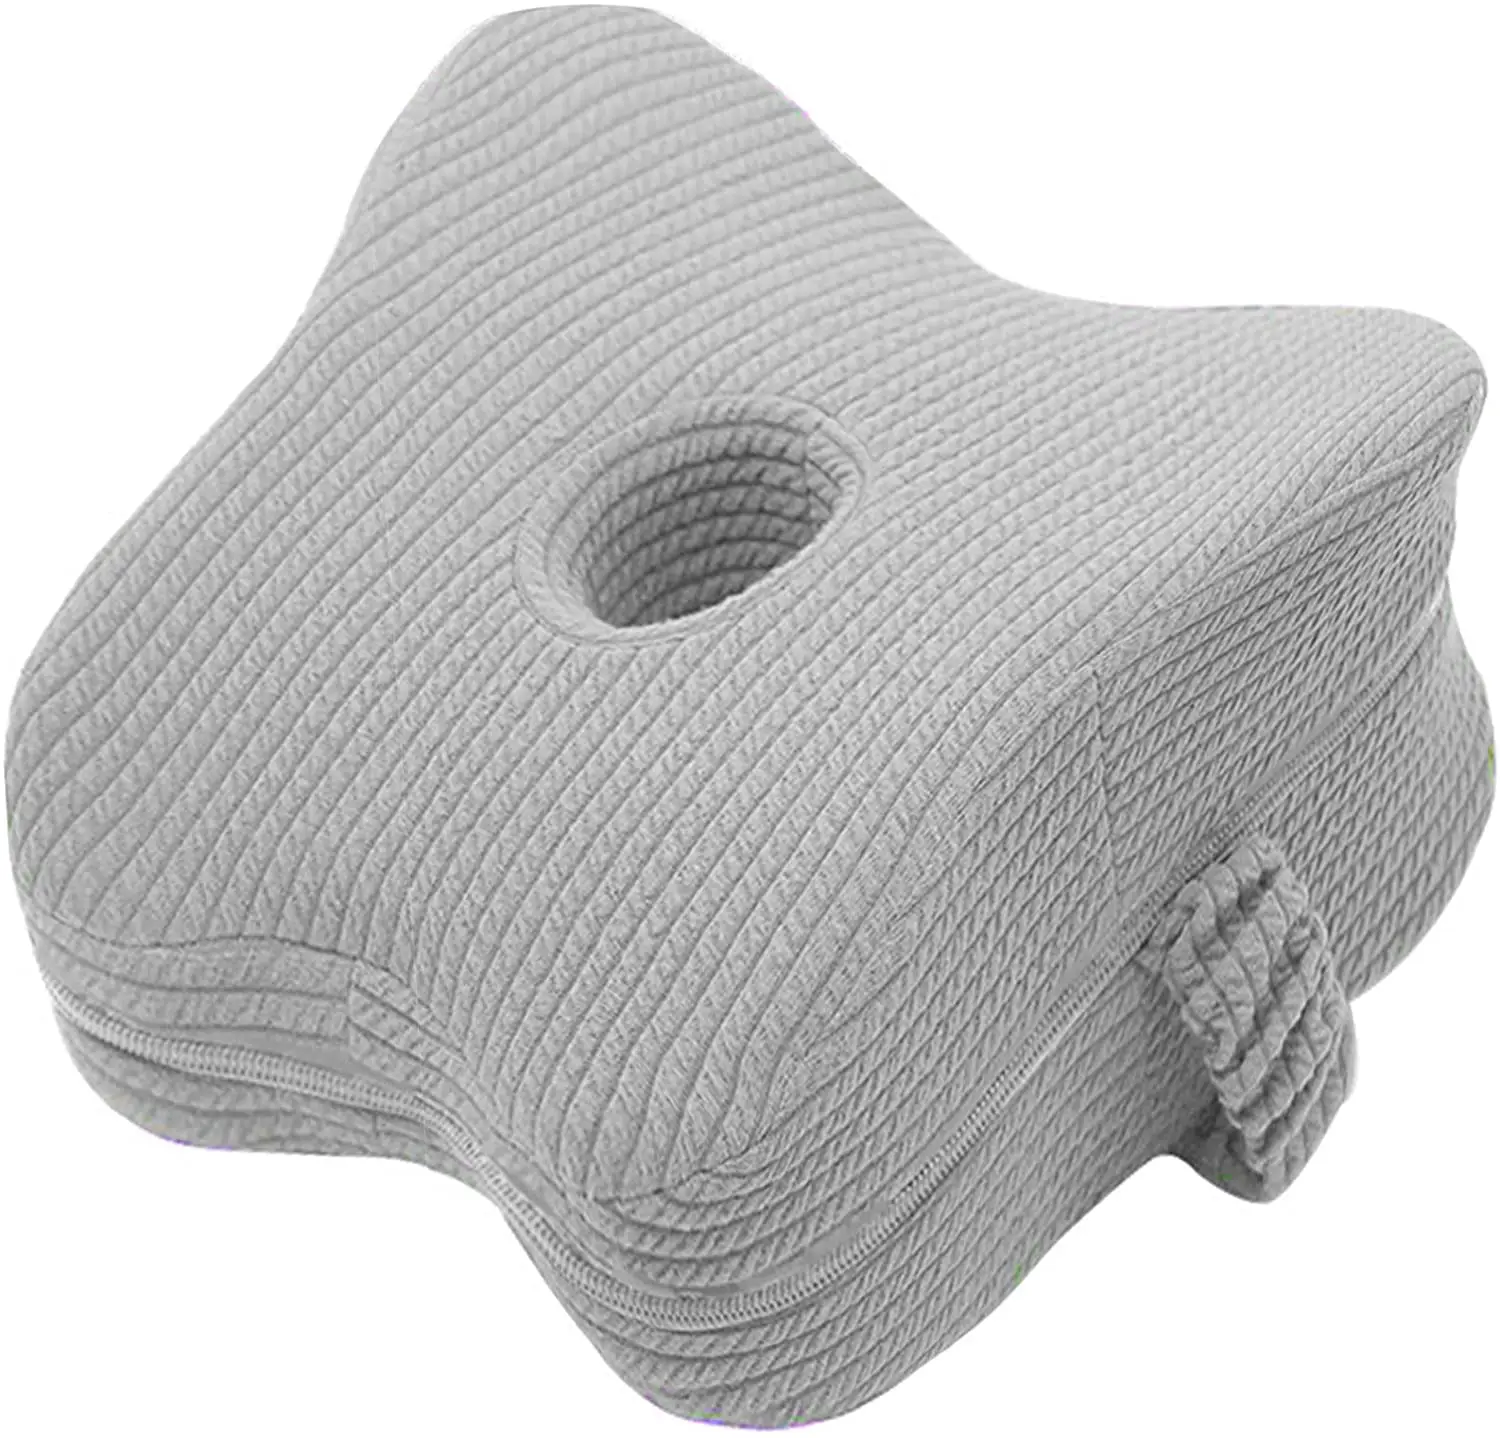 Under Knee Pillow for Side Sleepers Between Knee Wedge Pillow for